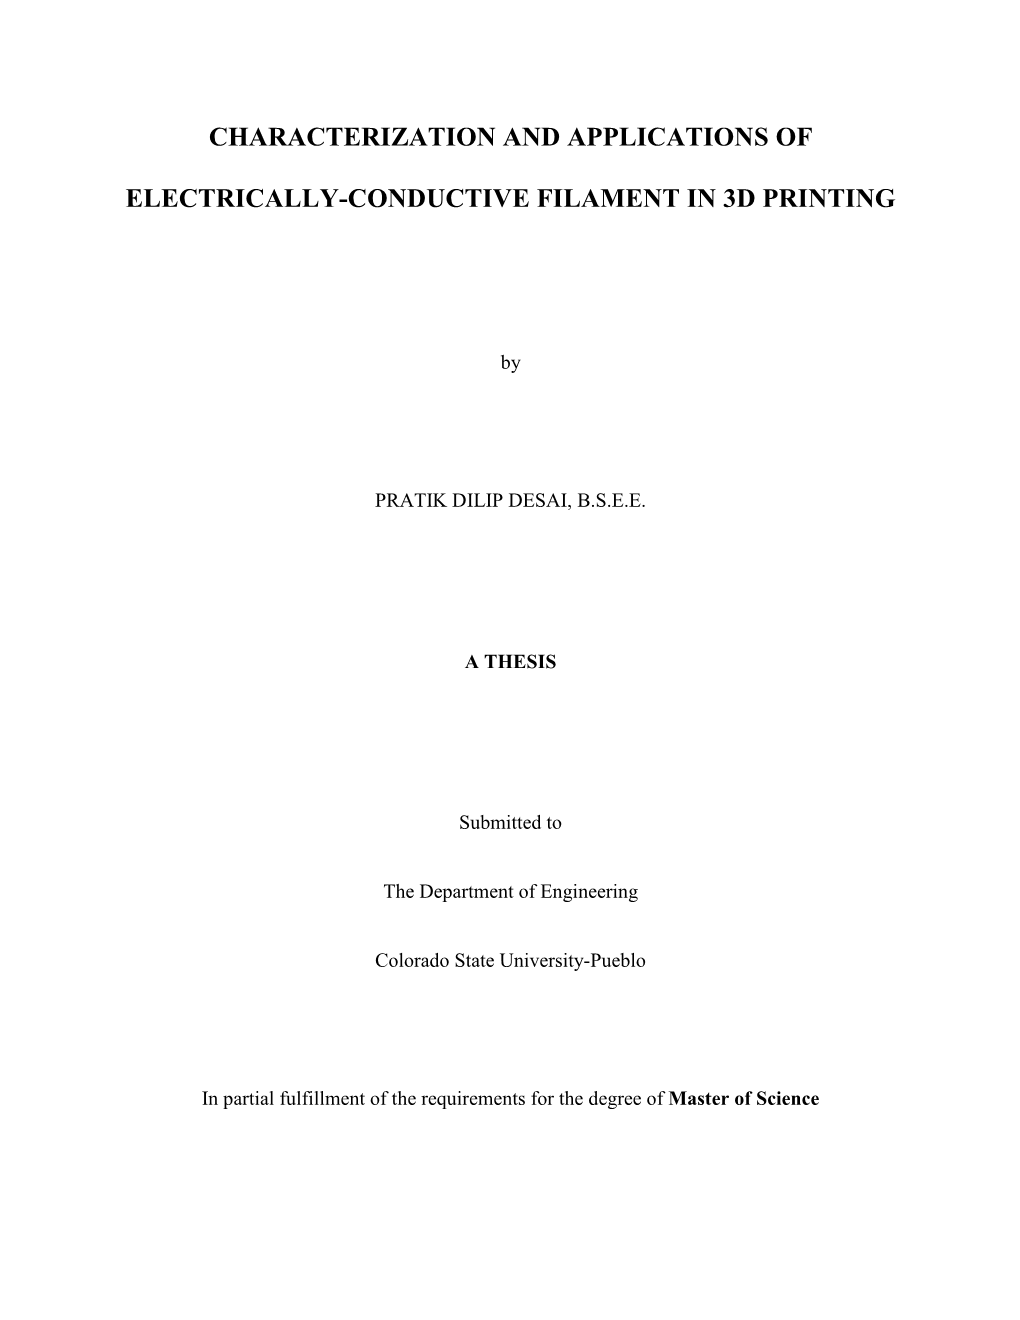 Characterization and Applications of Electrically-Conductive Filament in 3D Printing